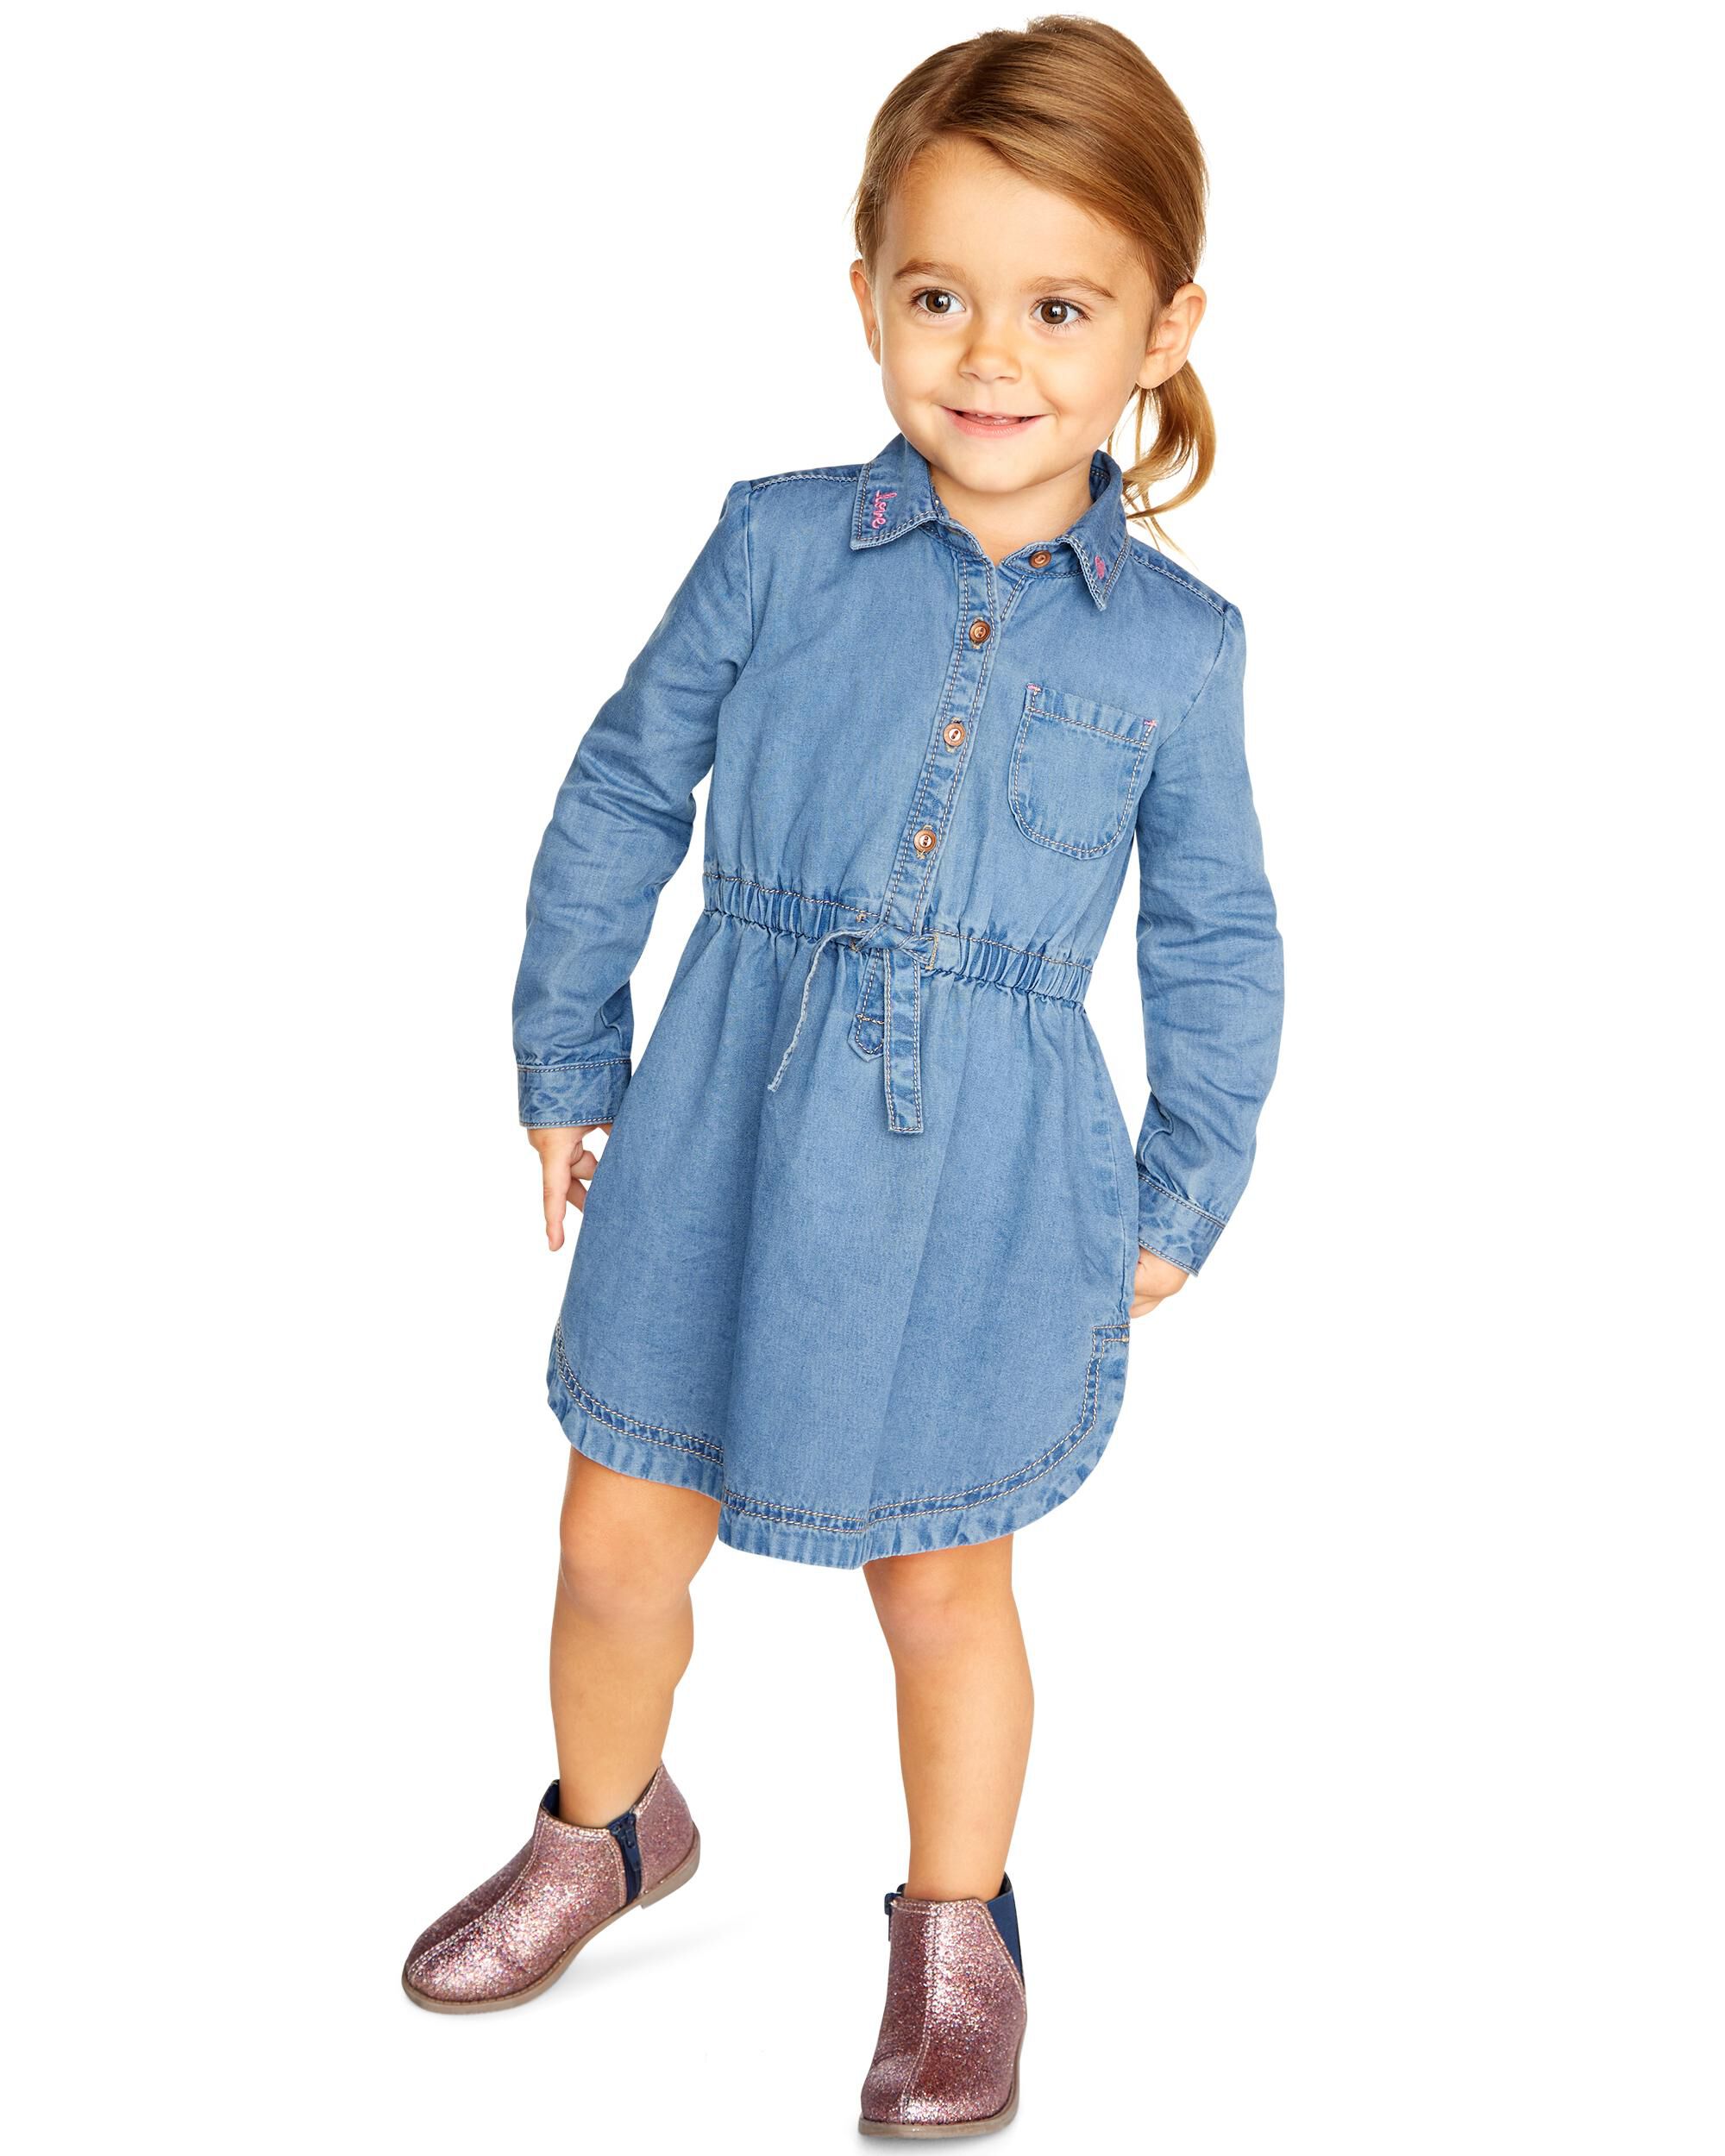 Embroidered Jean Dress | carters.com